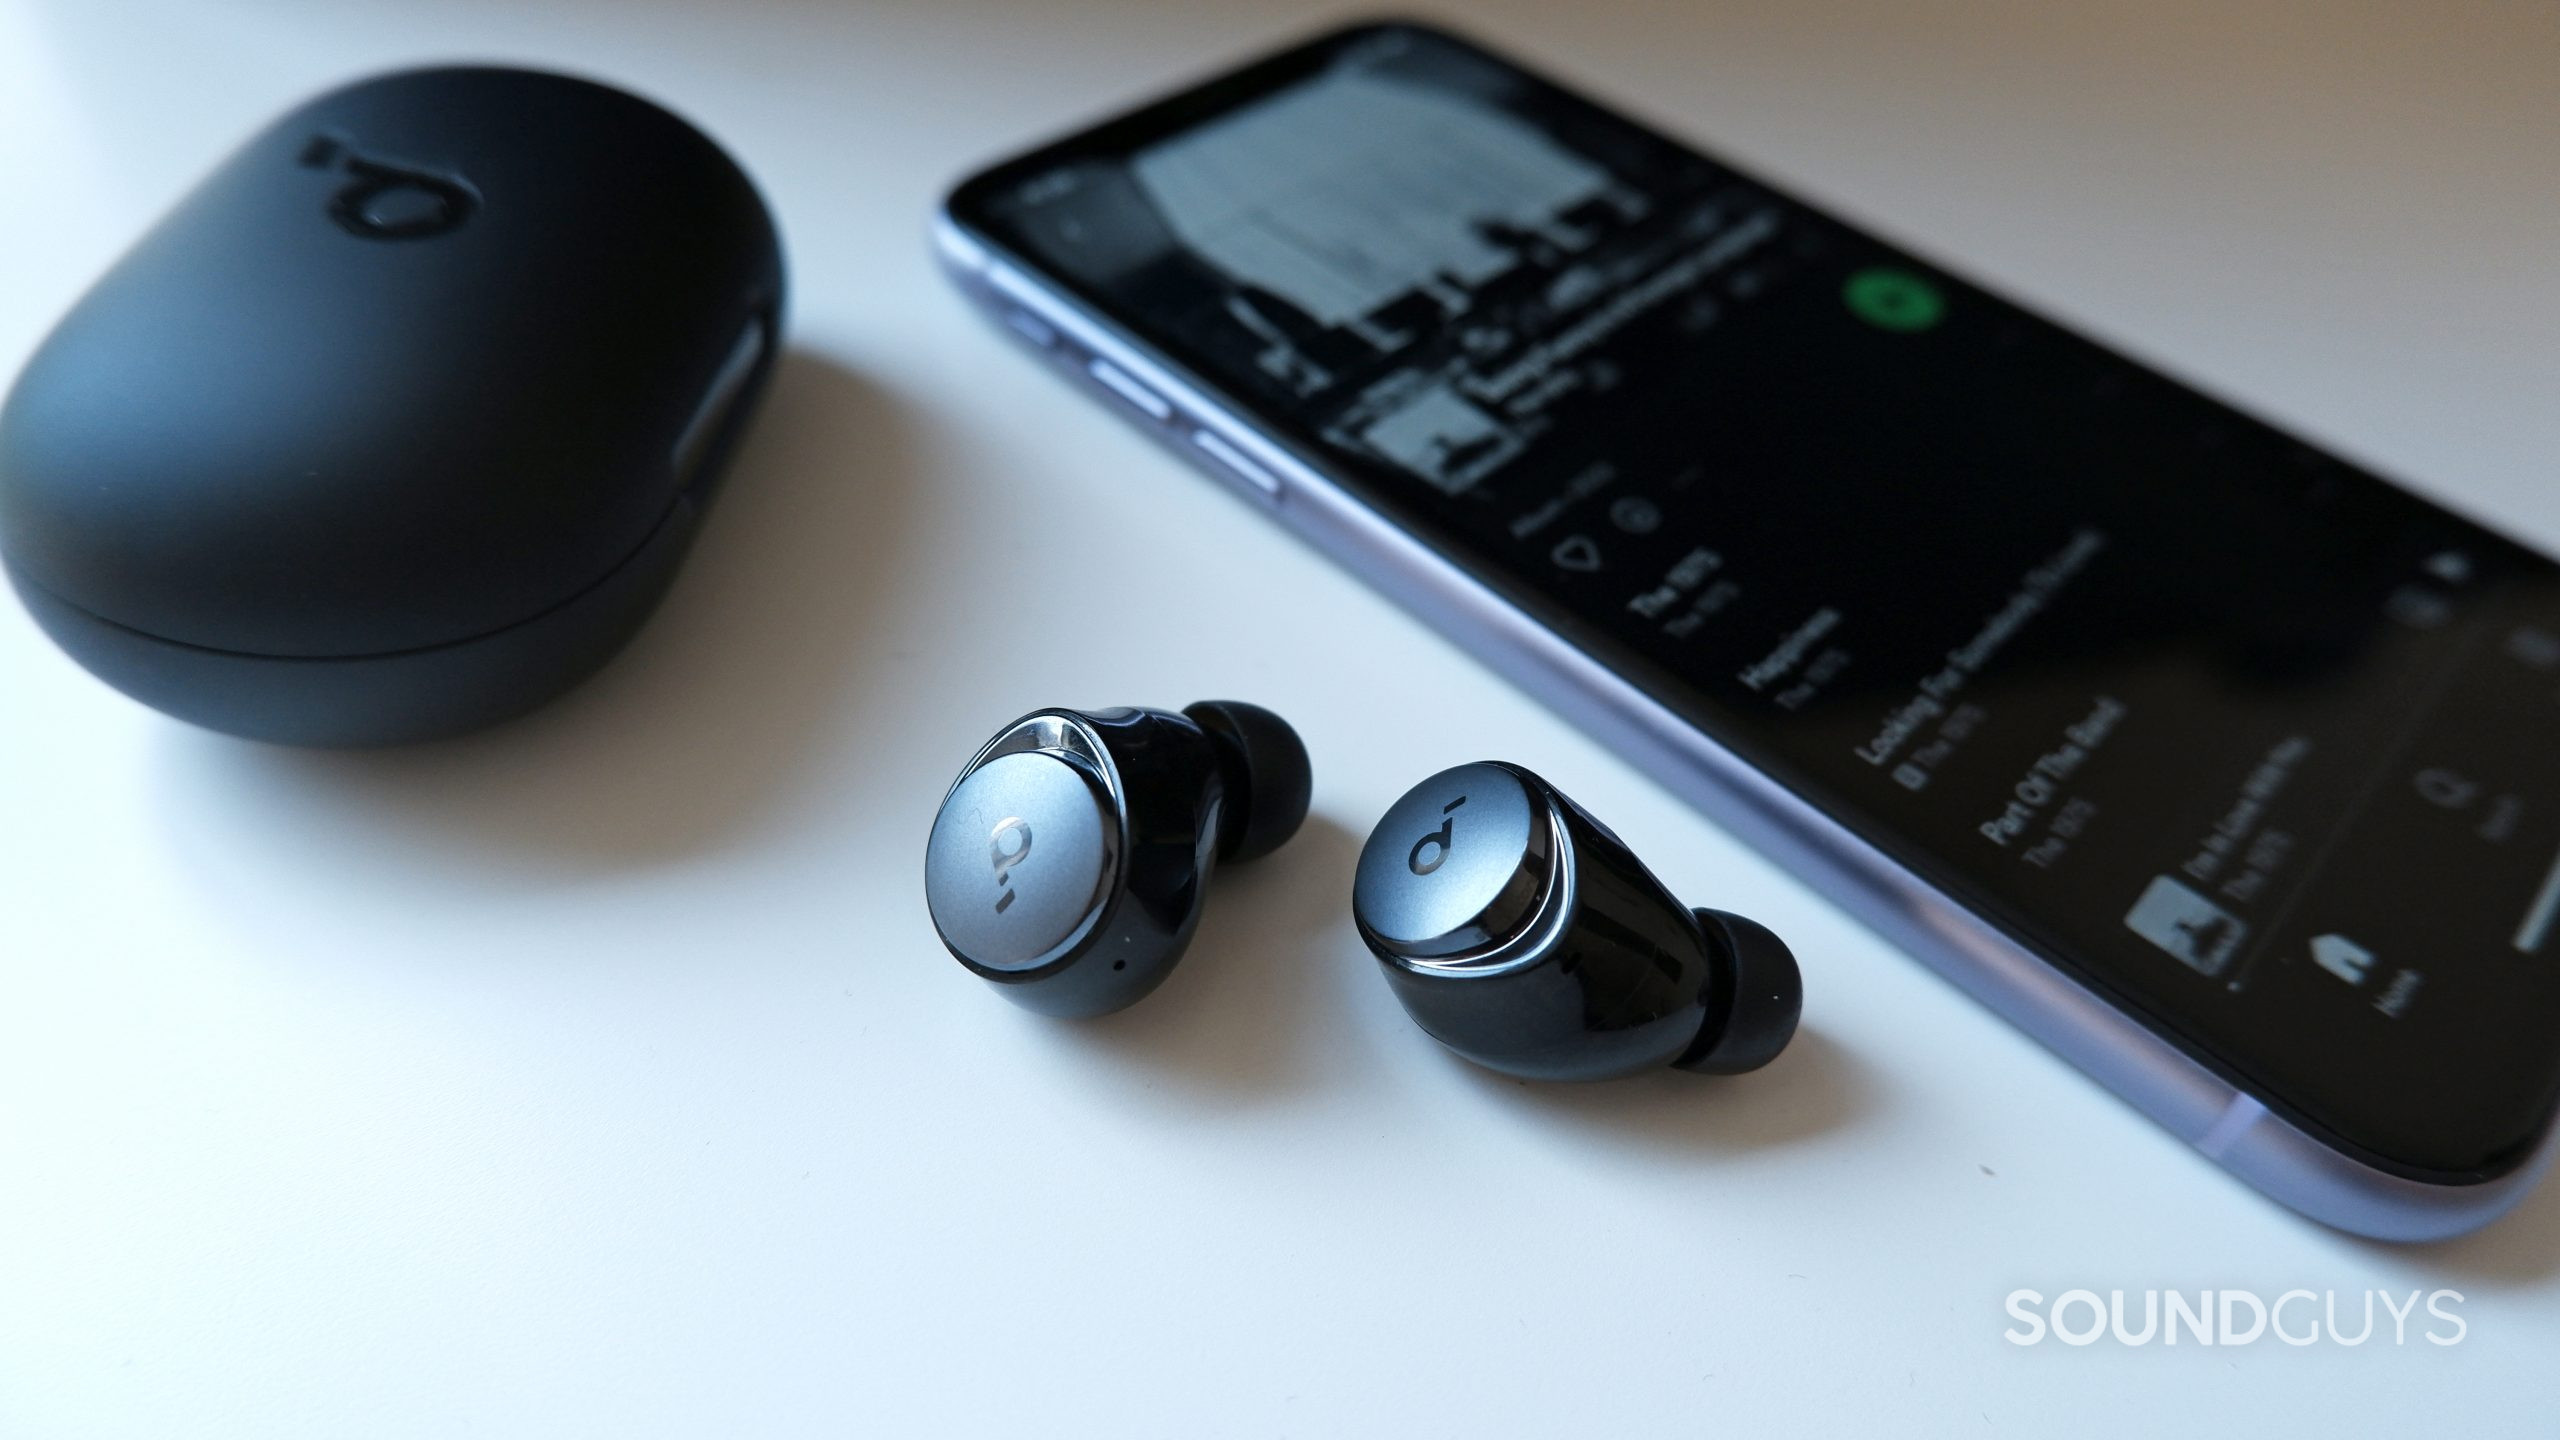 The Anker Soundcore Space A40 earbuds beside a phone with spotify open.